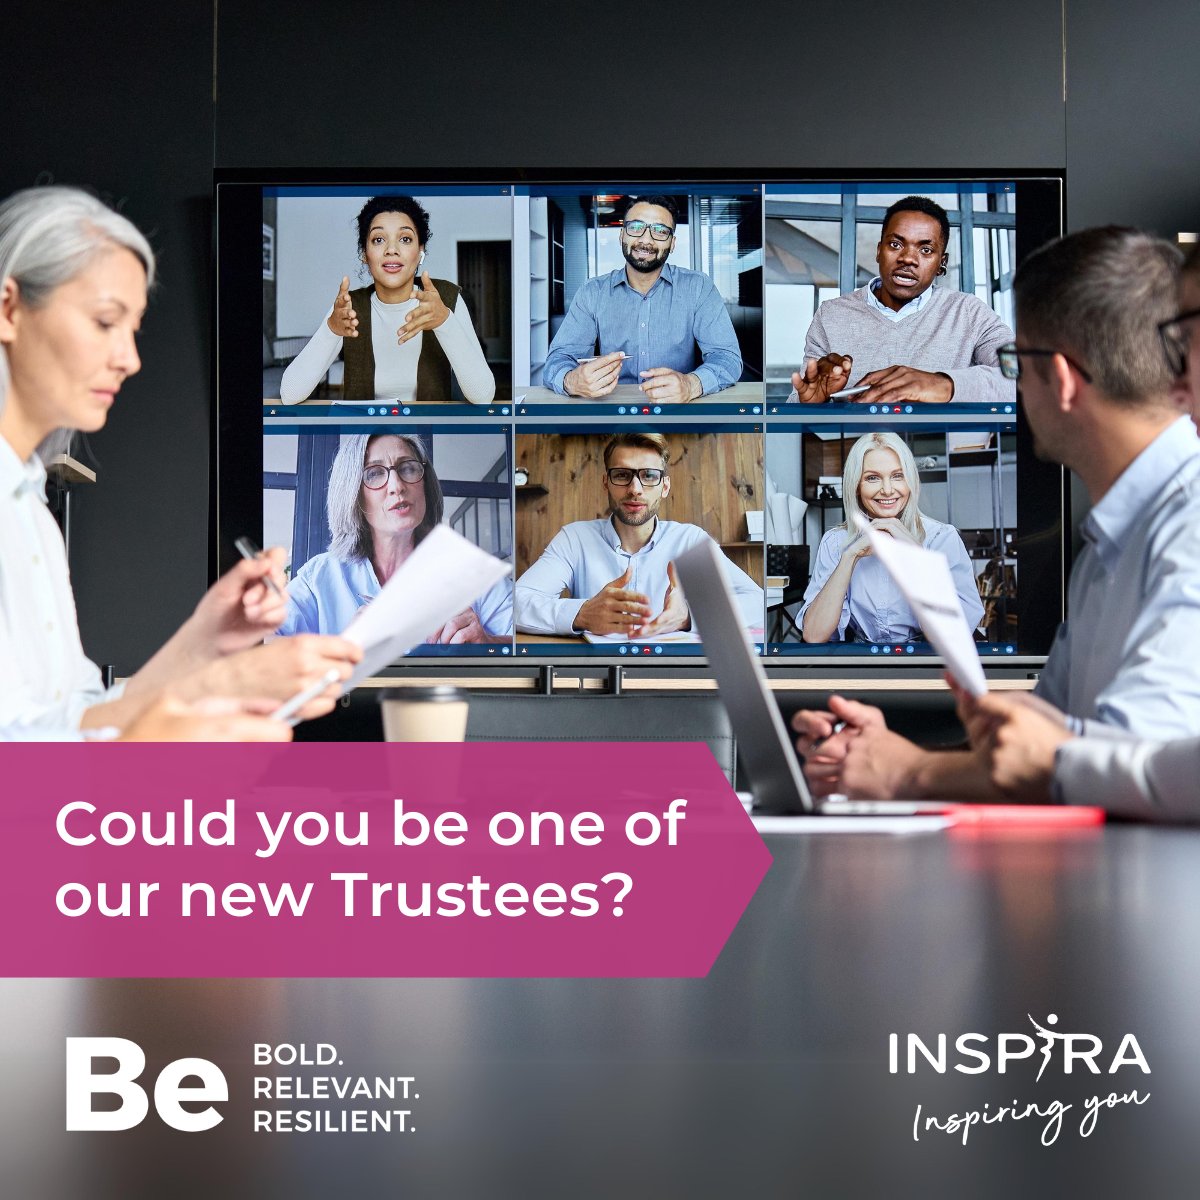 Exciting Opportunity! Inspira is on the lookout for two new trustees from the Lancashire area to play their part in helping the organisation’s work across the region. Anyone who is interested in finding out more and applying is invited to contact Nurole at tinyurl.com/2aknf469